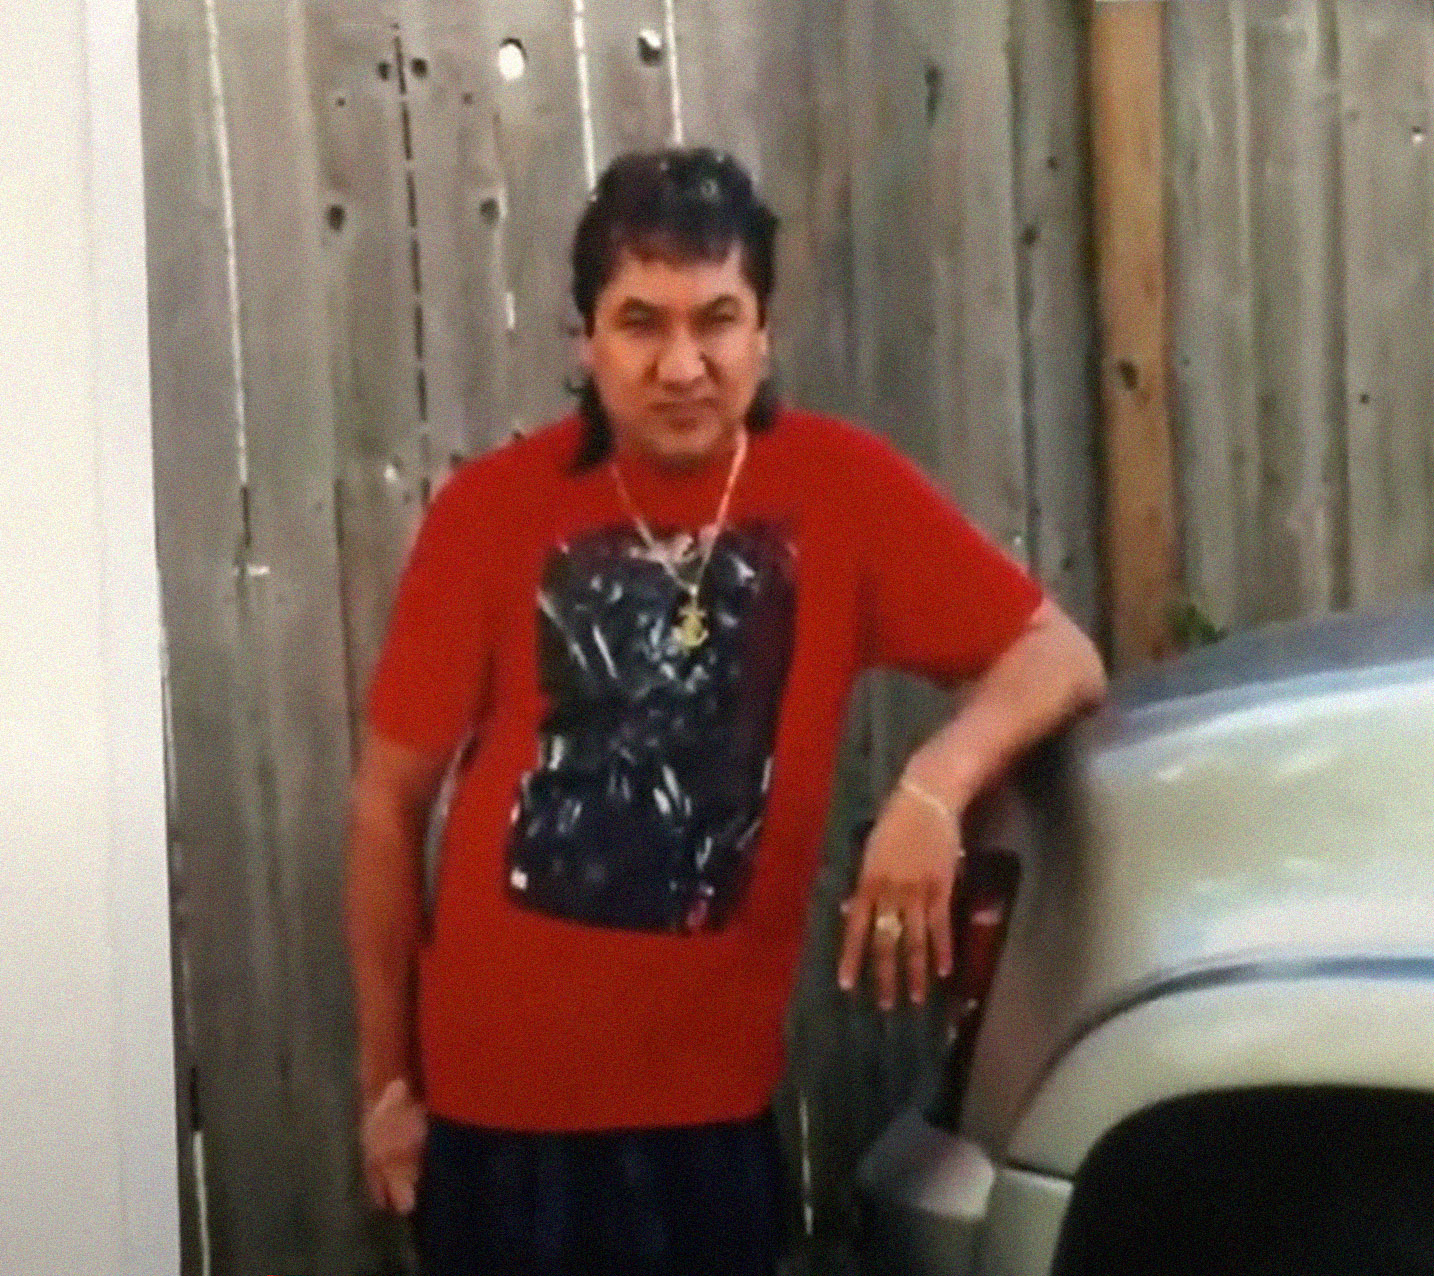 PHOTO: Oscar Rosales is pictured in an image released by the Houston Poilce Department in an interview released via YouTube on Jan. 24, 2022. Rosales is wanted in the killing of Harris County Constable deputy Cpl. Charles Galloway.